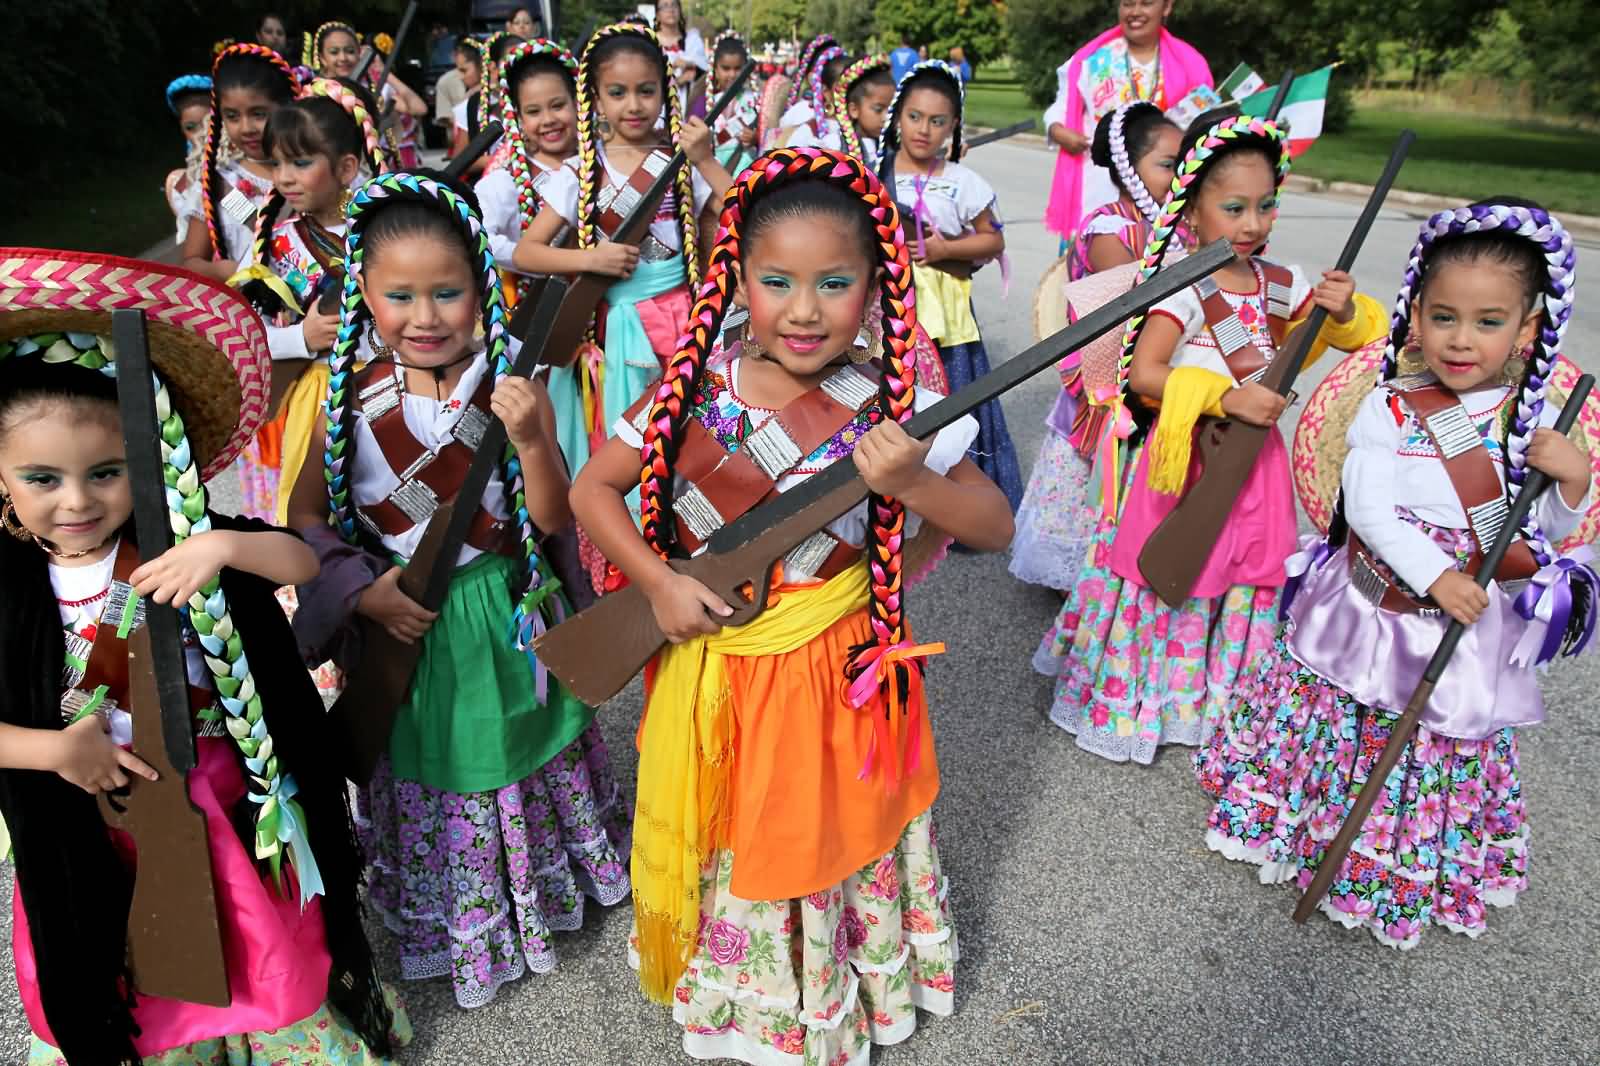 Little Mexican Girls With Guns During Mexico Independence Day Celebration